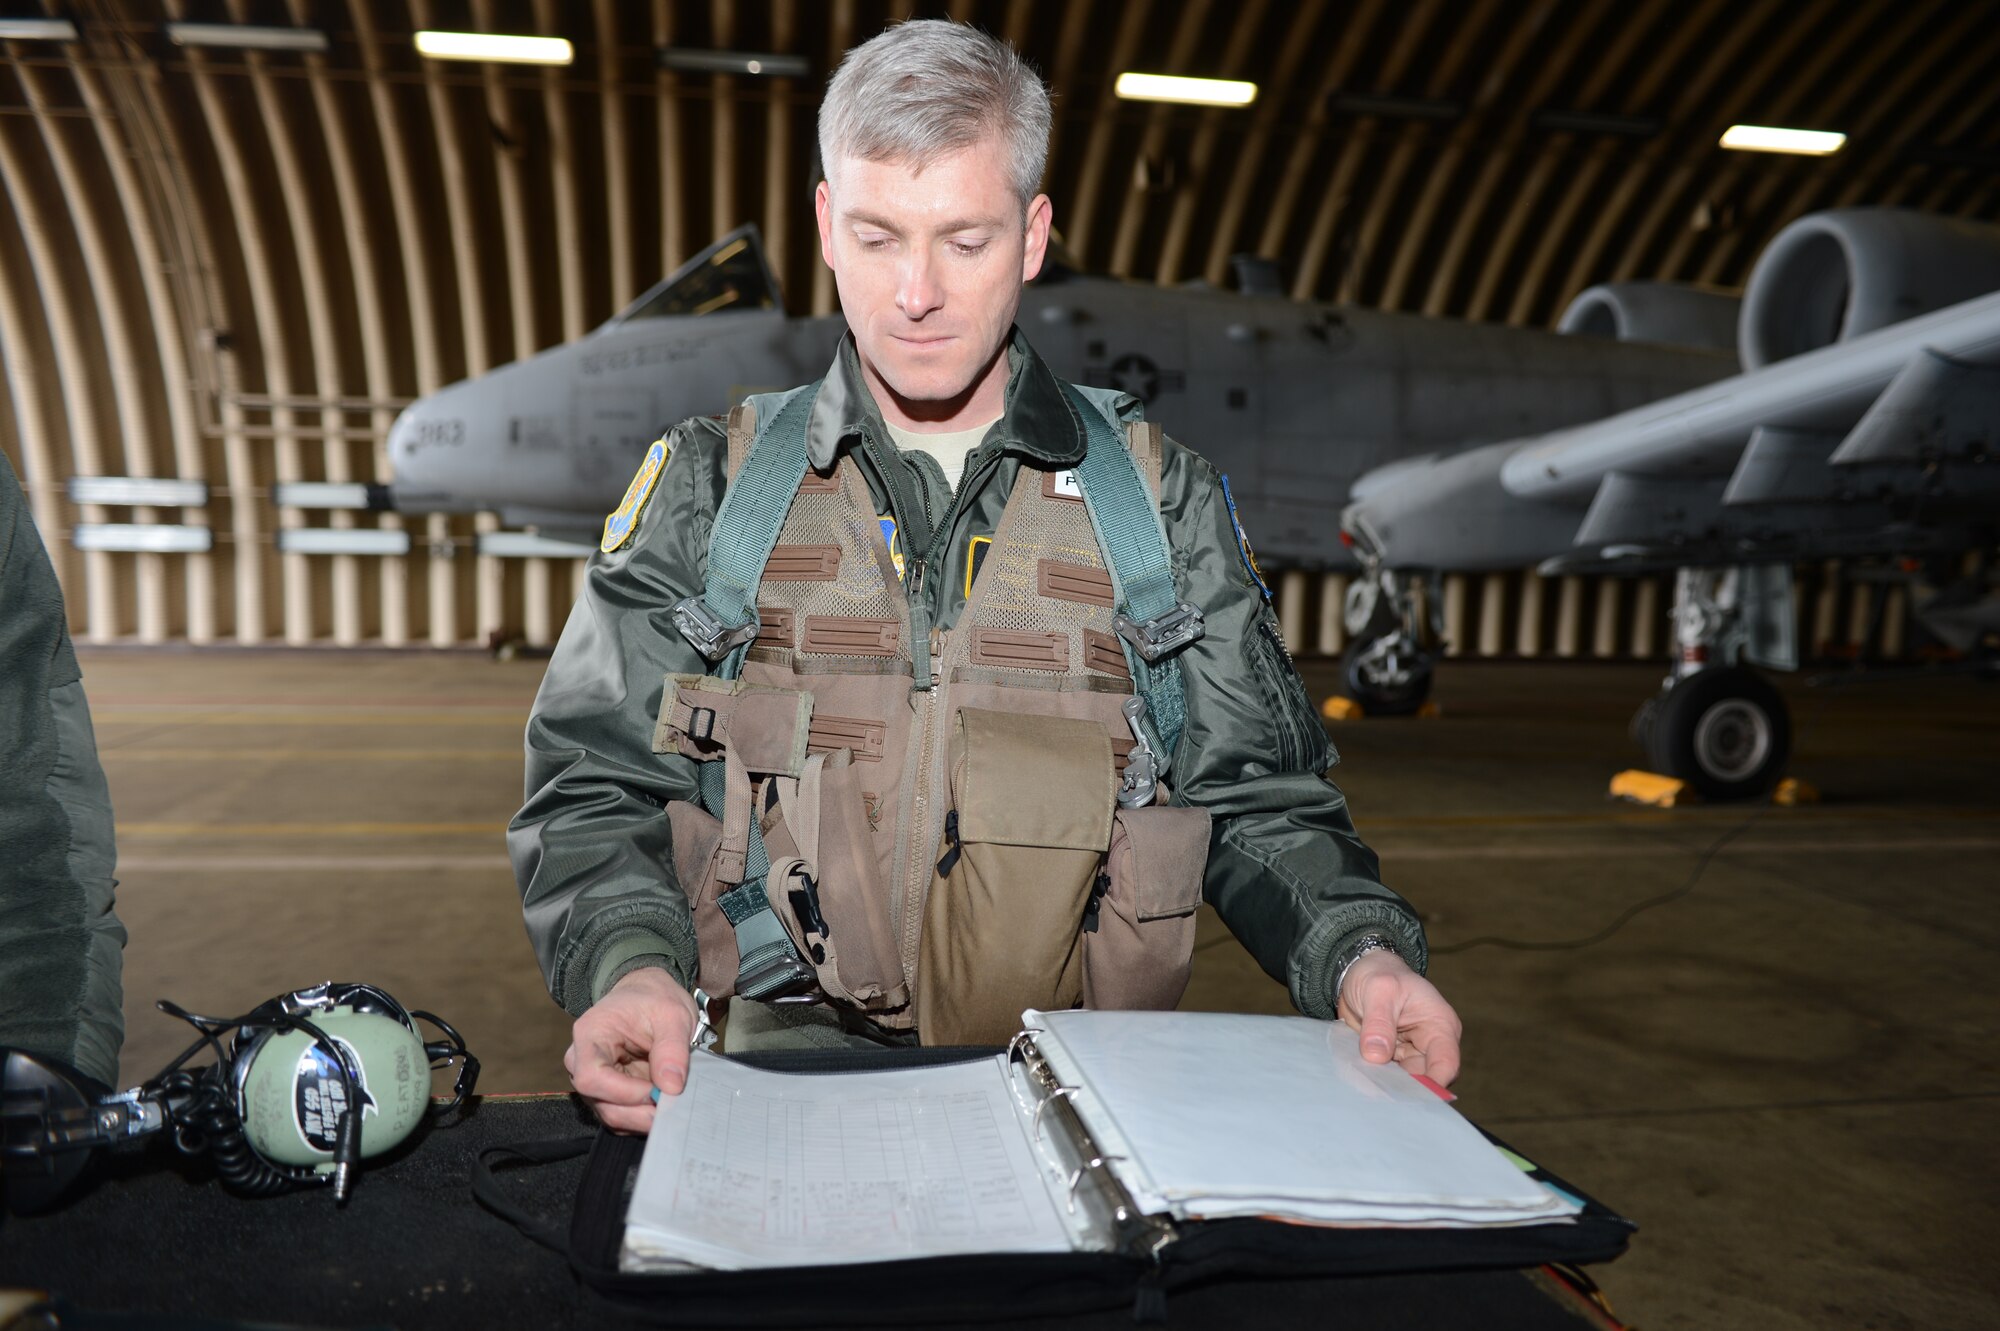 Maj. (Dr.) Jeffrey Woolford, Air Force Institute of Technology student, goes through maintenance forms before taking his second fini-flight in the A-10 Thunderbolt II at Spangdahlem Air Base, Germany, Jan. 17, 2013. At this time, Woolford was an A-10 pilot with the 81st Fighter Squadron at Spangdahlem. Woolford took his first fini-flight when he transitioned into active duty from the Air National Guard to become a pilot-physician.  A fini-flight is a tradition that celebrates a pilot’s final flight in an aircraft. He took two because upon re-entering active duty there was no guarantee that he would return to flight. (U.S. Air Force photo by Staff Sgt. Natasha Stannard)